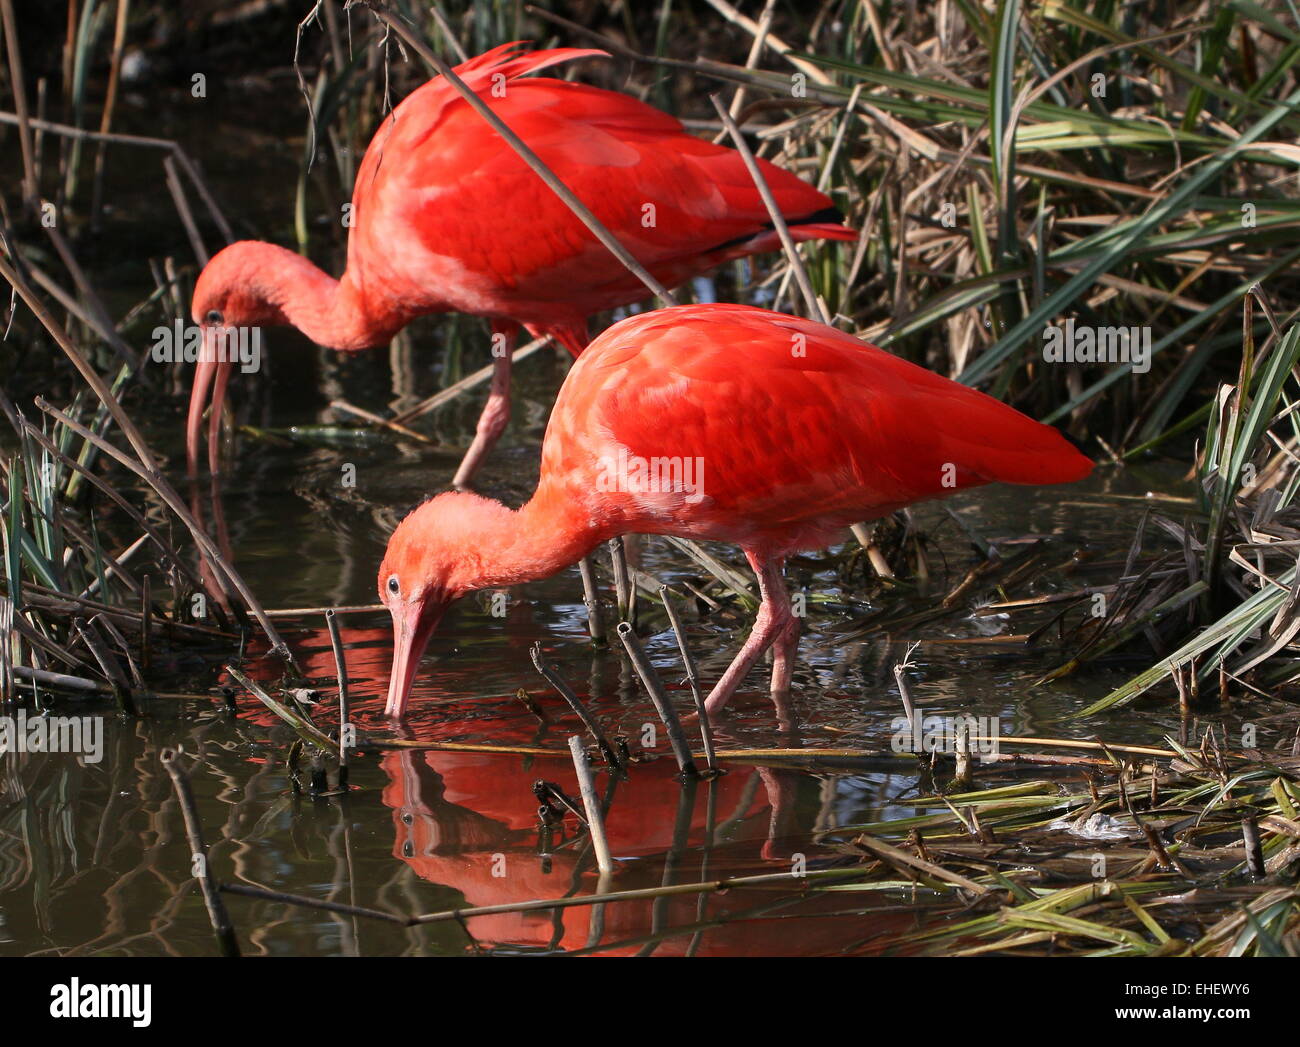 Close-up of two South American  Scarlet Ibises (Eudocimus ruber) foraging in wetlands Stock Photo